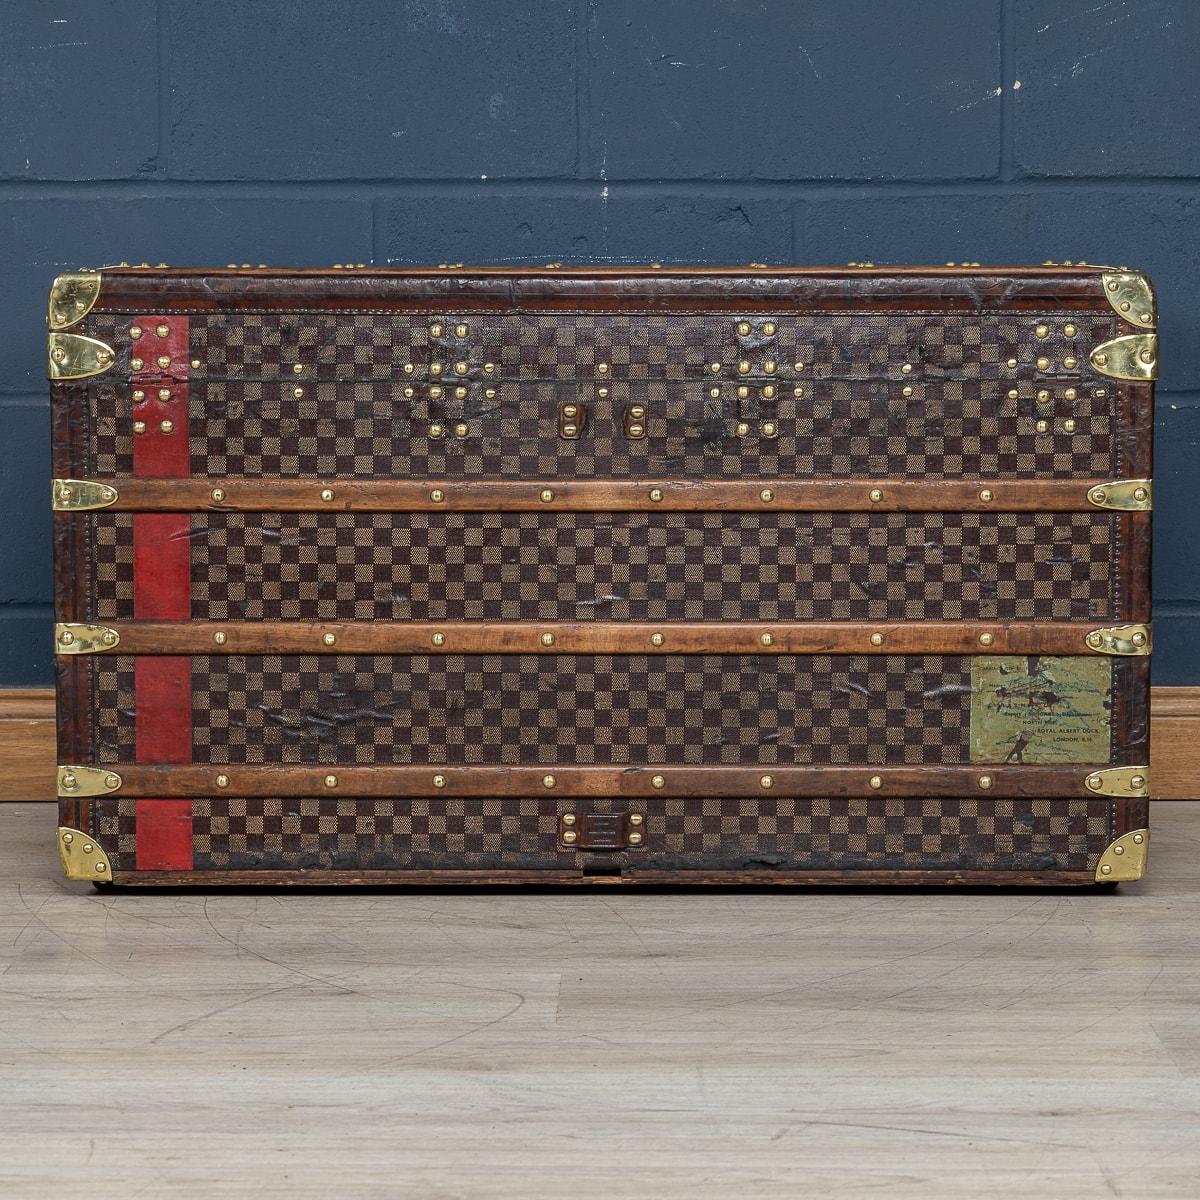 French Antique 20th Century Louis Vuitton Courier Trunk In Damier Canvas, France c.1900